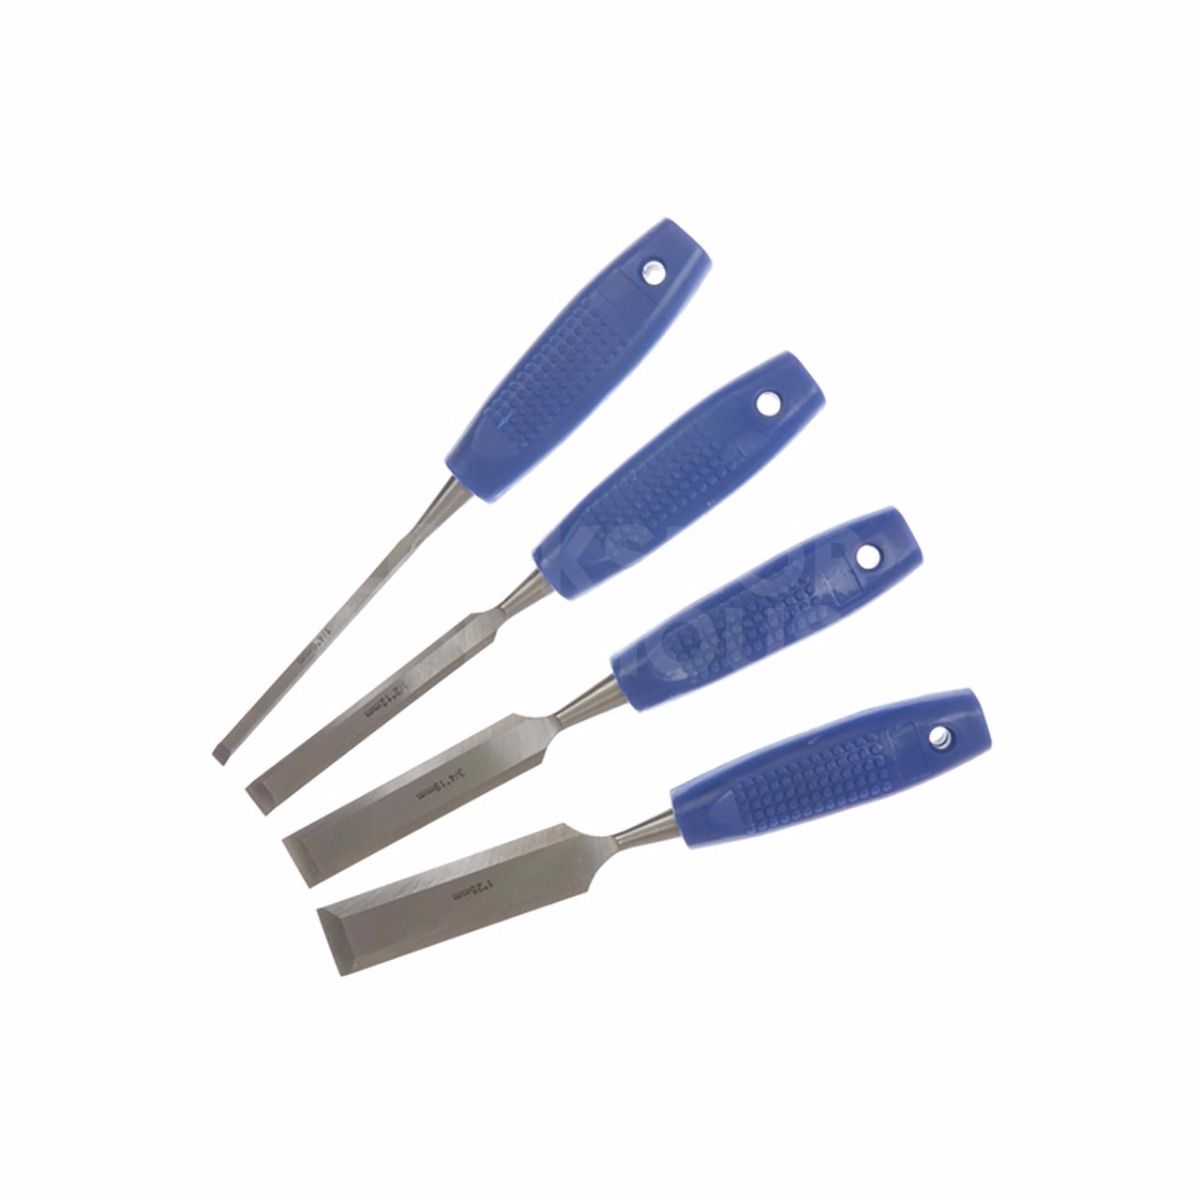 Complete Set of 4 Chisels by Blue Spot